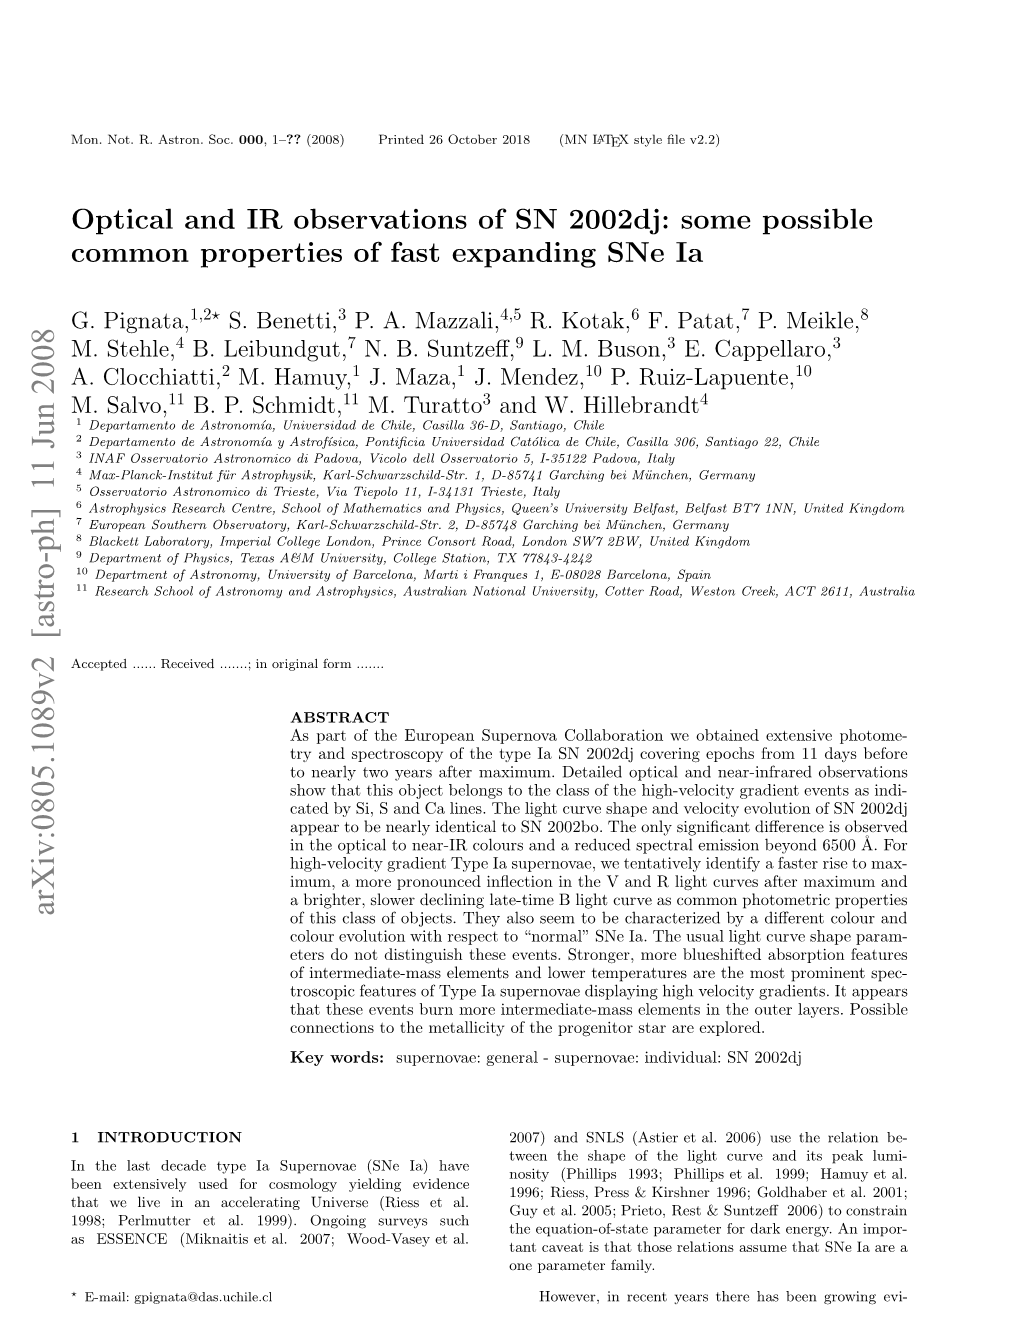 Optical and IR Observations of SN 2002Dj: Some Possible Common